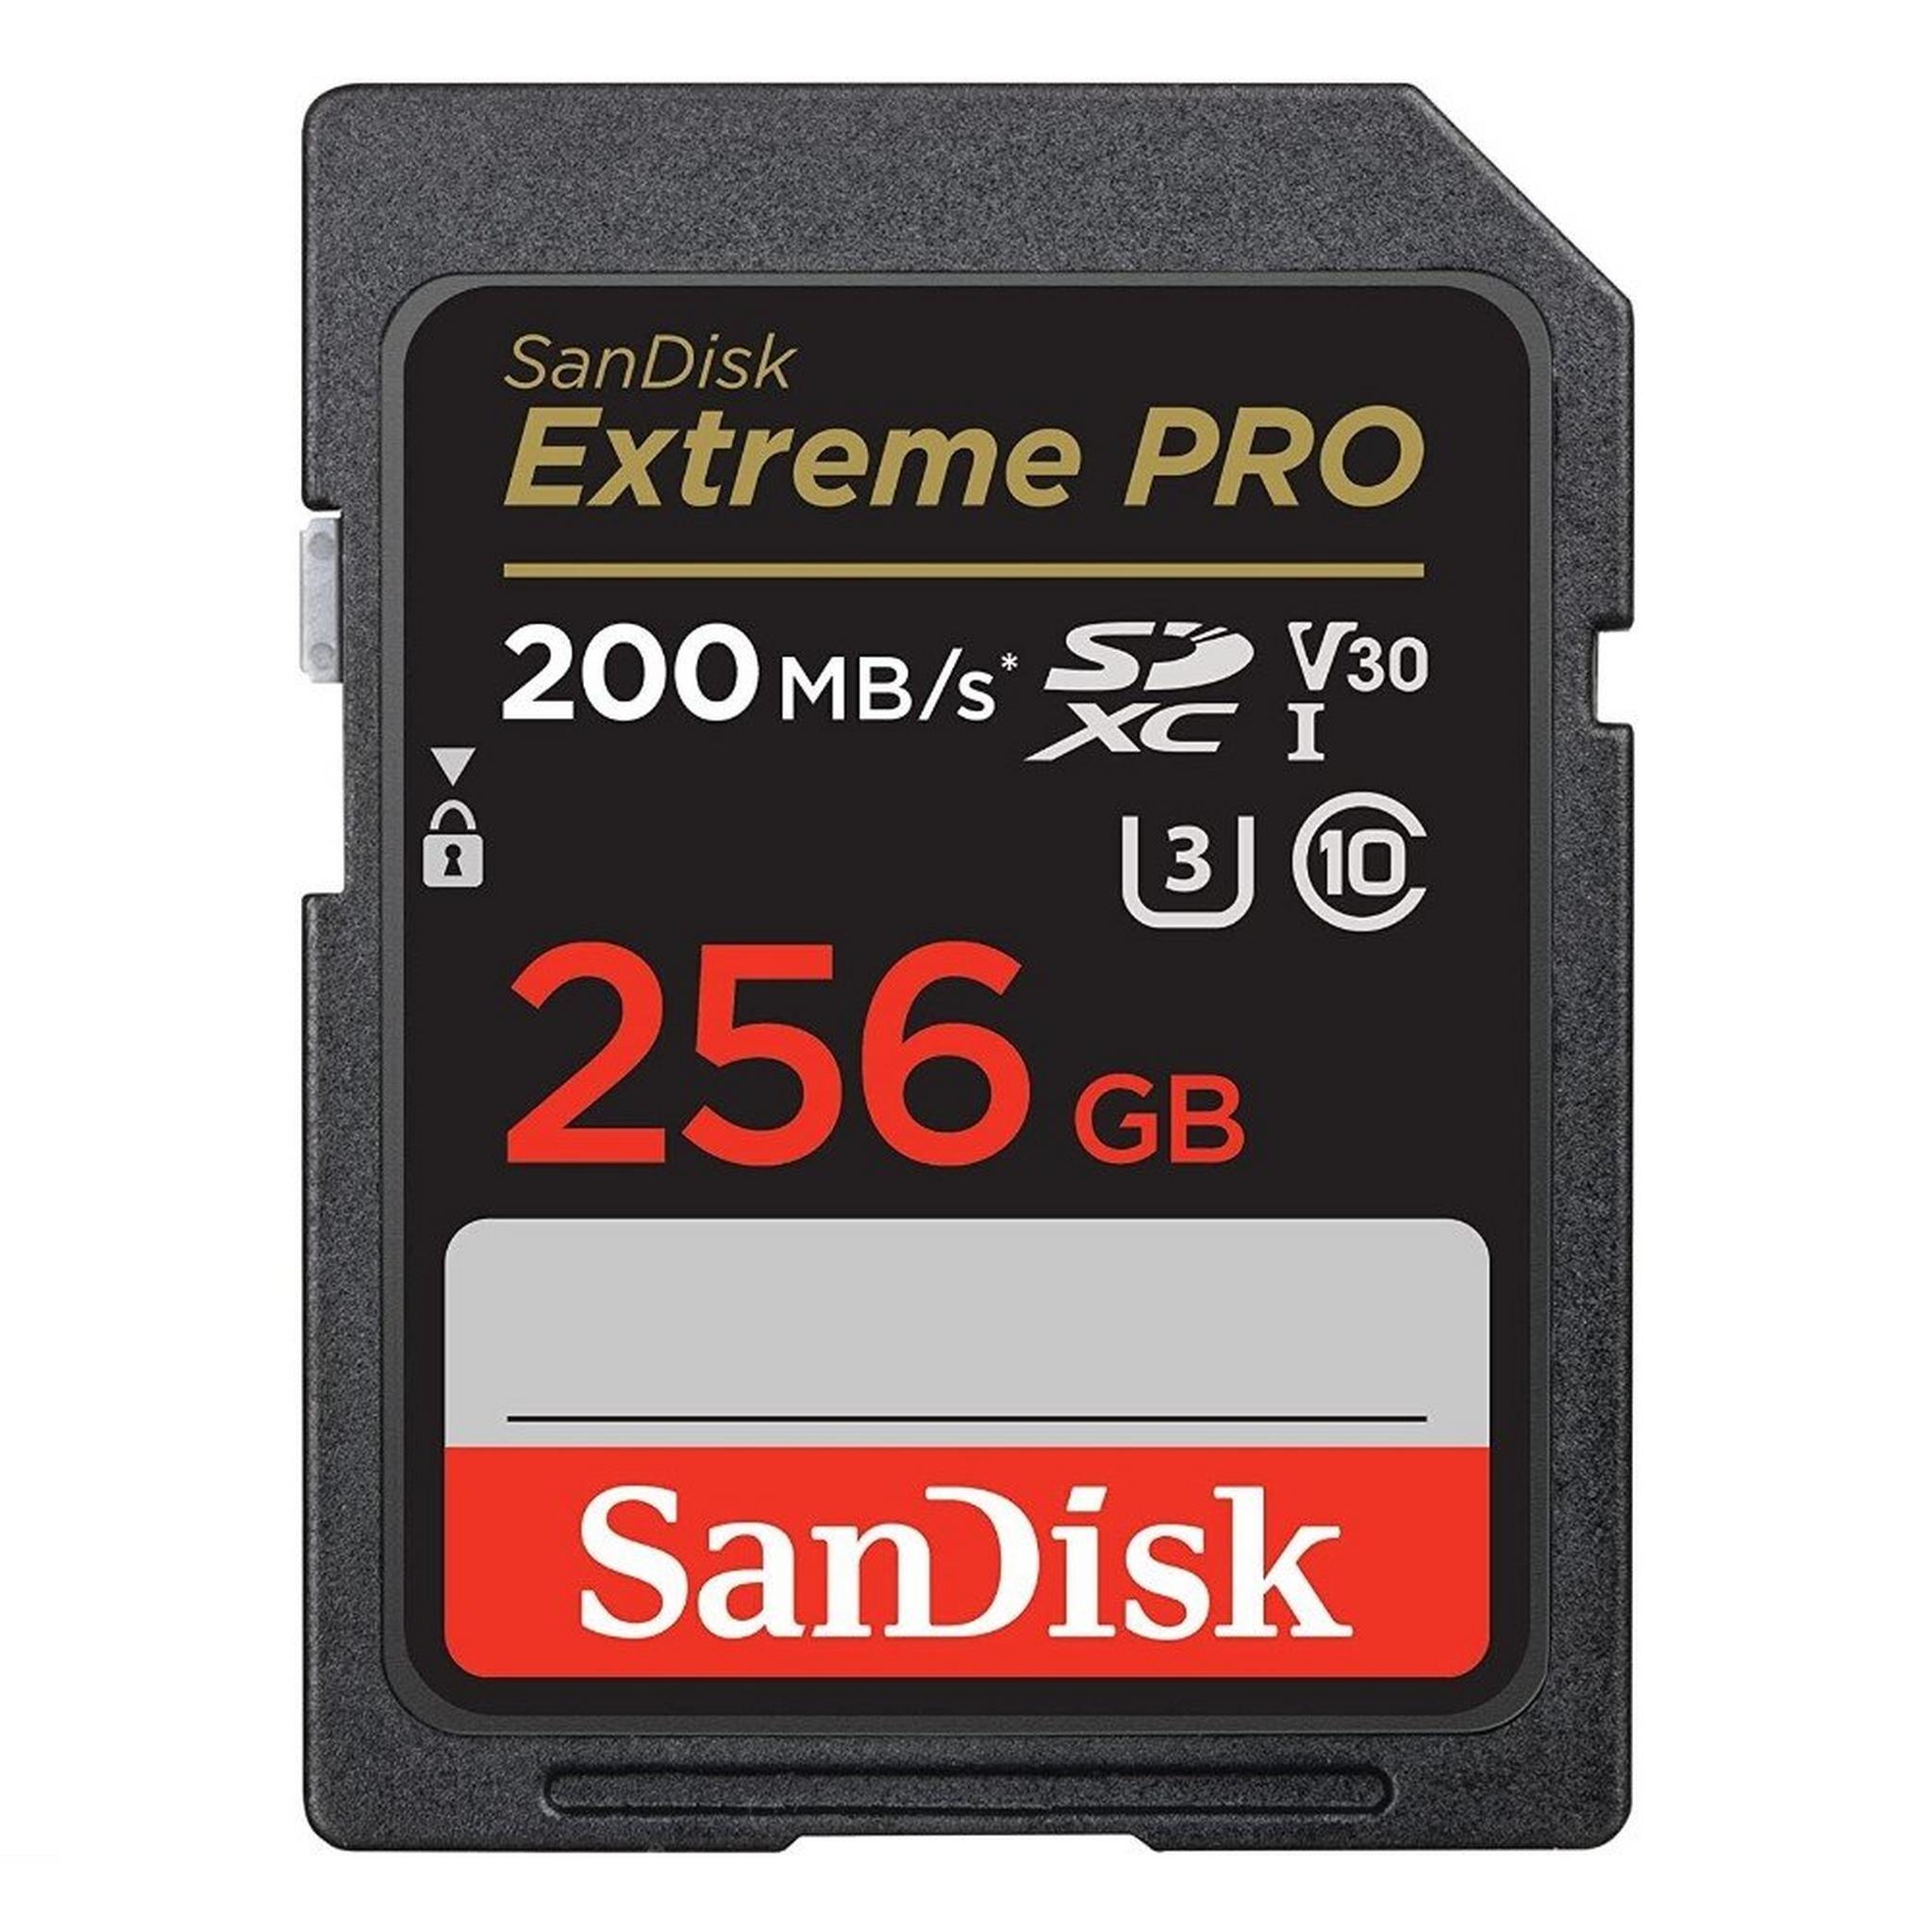 Sandisk Extreme Pro UHS SD Card, 256GB - SDSDXXD-256G-GN4IN